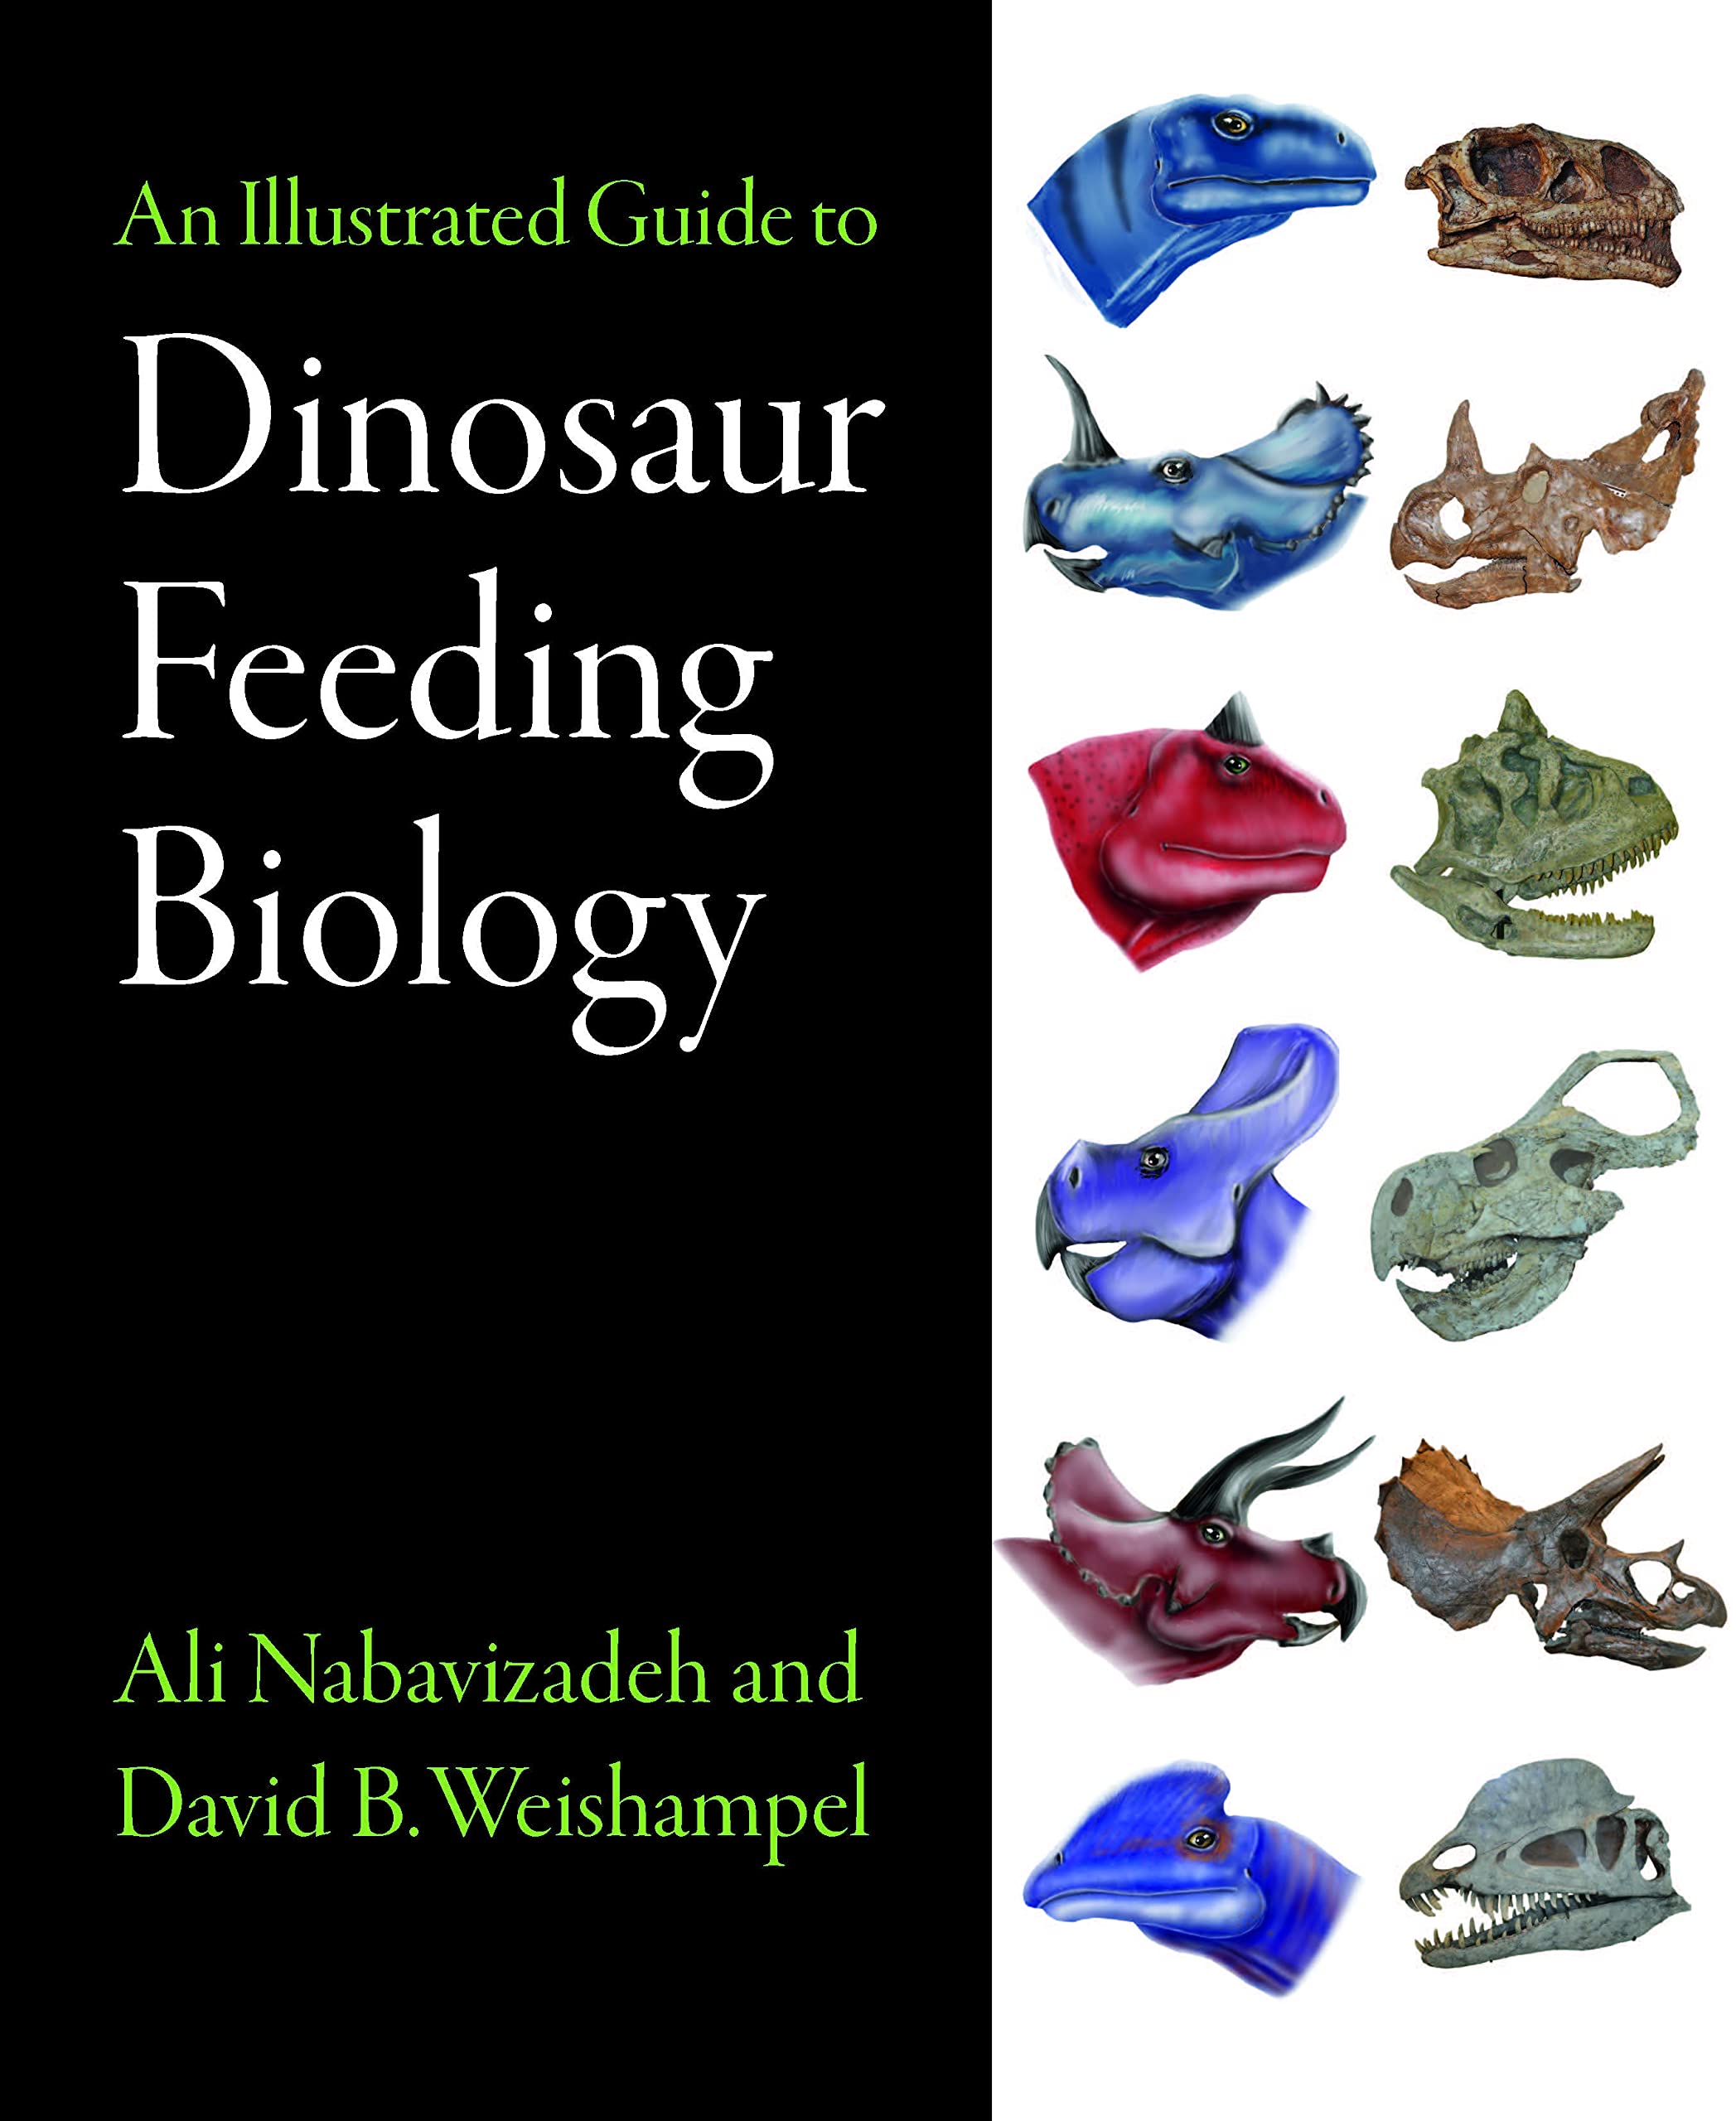 Book cover of An Illustrated Guide to Dinosaur Feeding Biology by Ali Nabavizadeh and David Weishampel